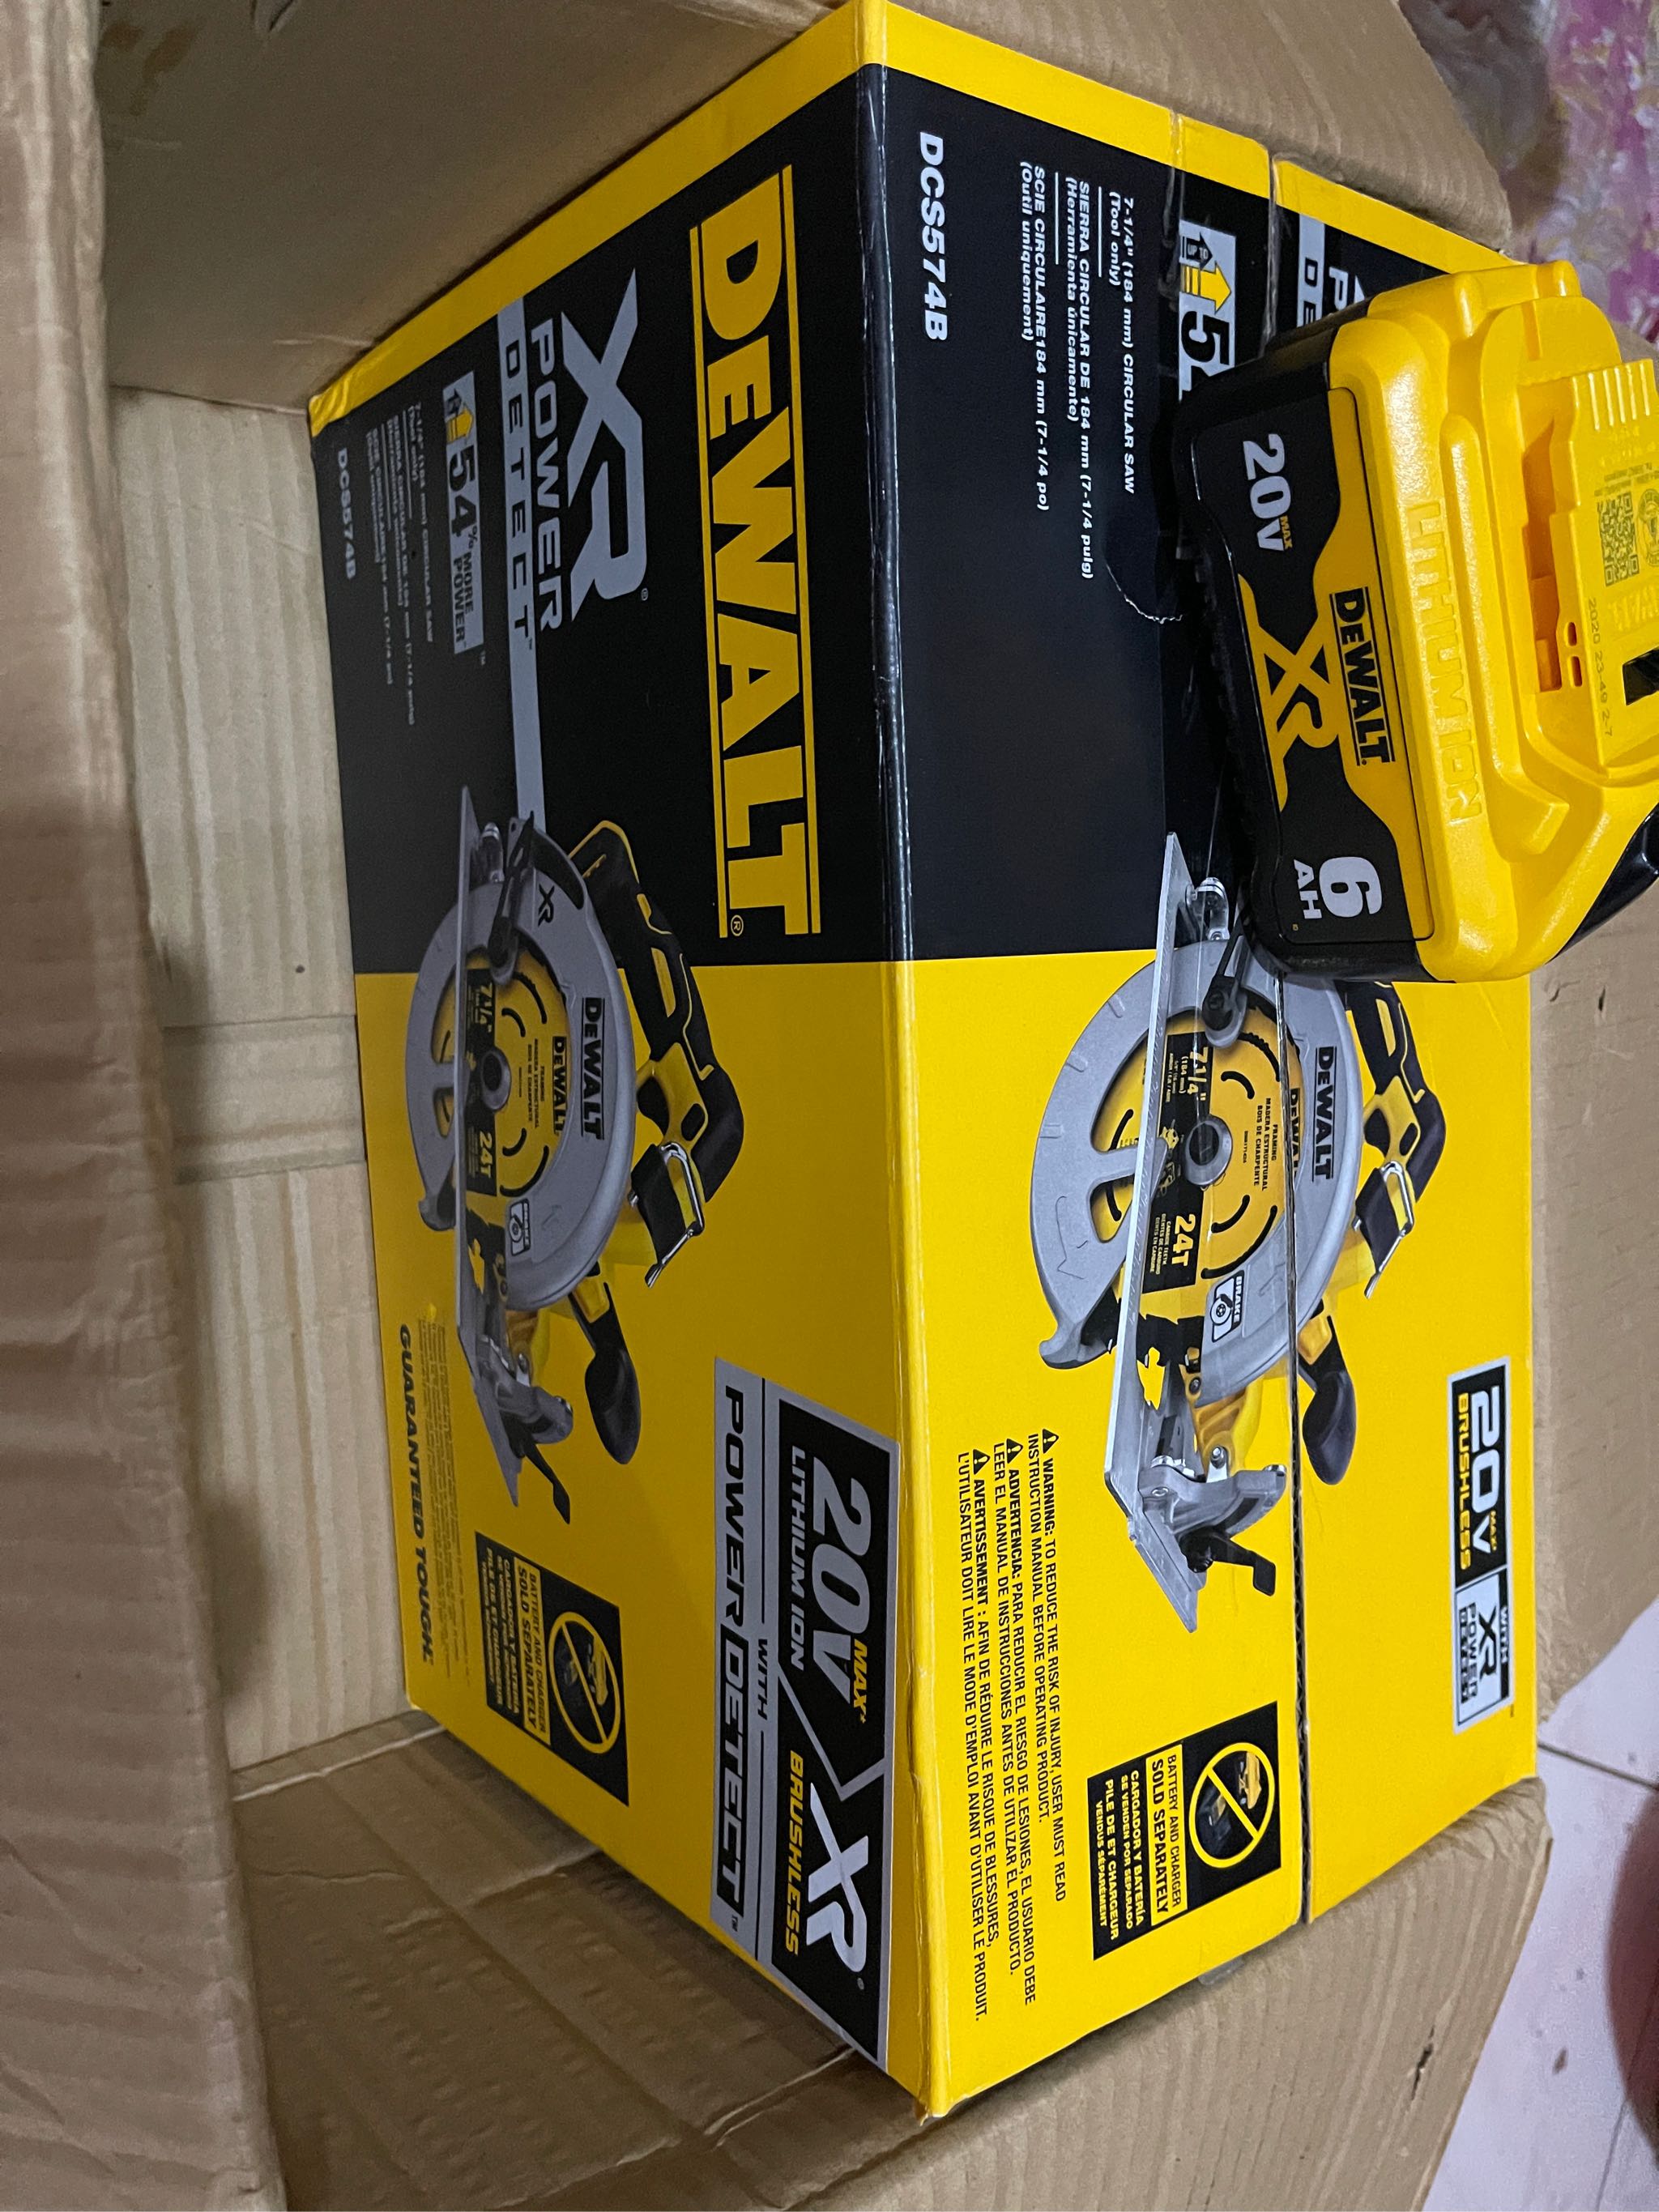 DeWALT DCS574B 20V MAX XR® 7-1/4 IN. BRUSHLESS CIRCULAR SAW COMBO KIT WITH POWER  DETECT™ TOOL TECHNOLOGY Lazada PH